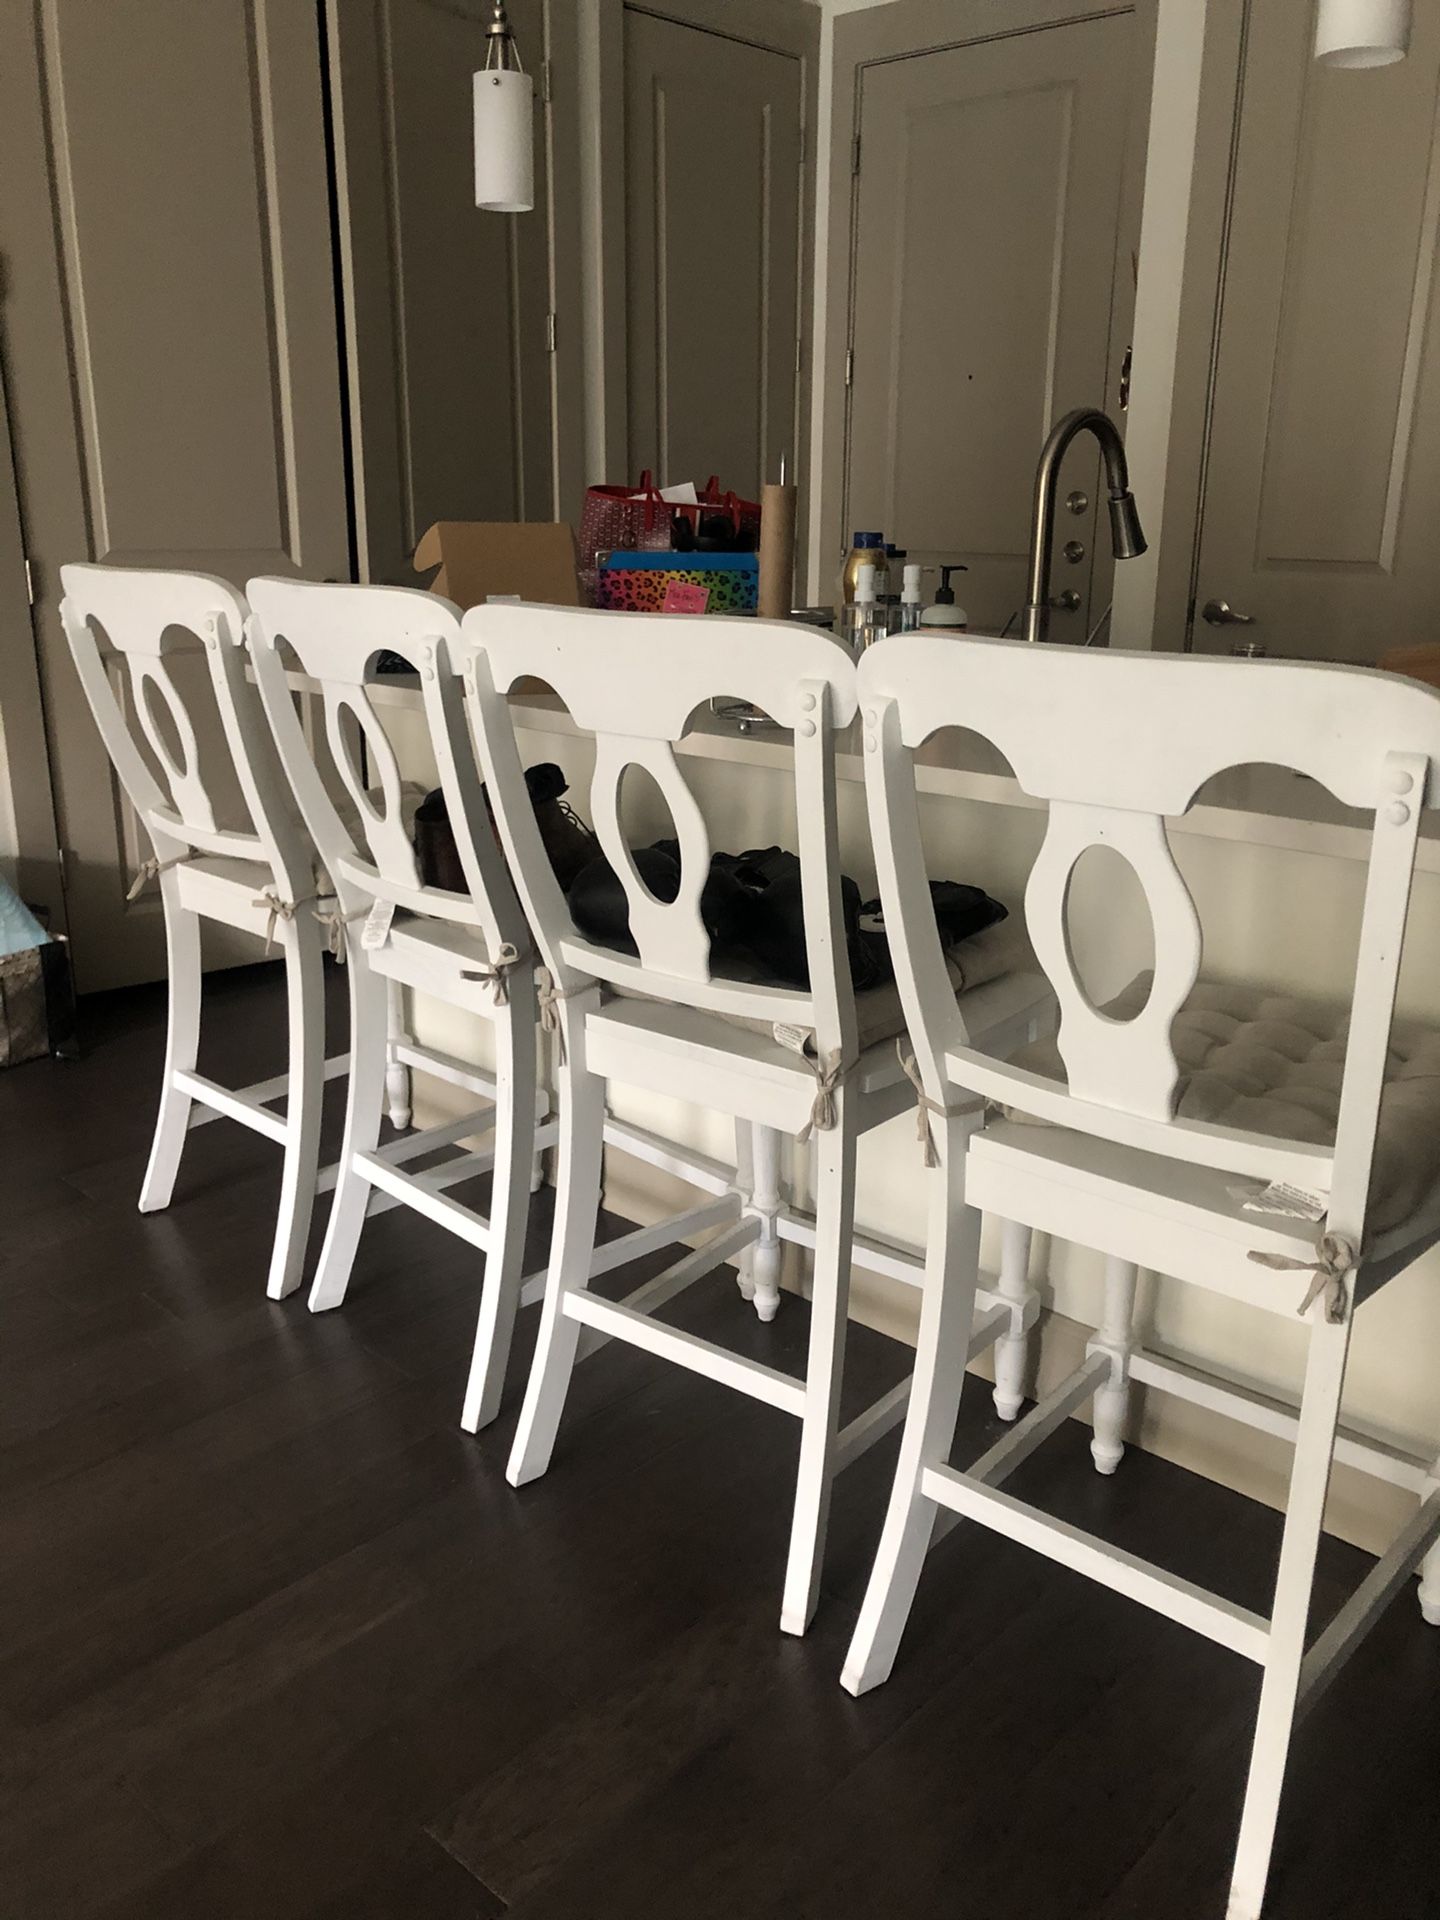 24” white French farmhouse stools (counter chairs)